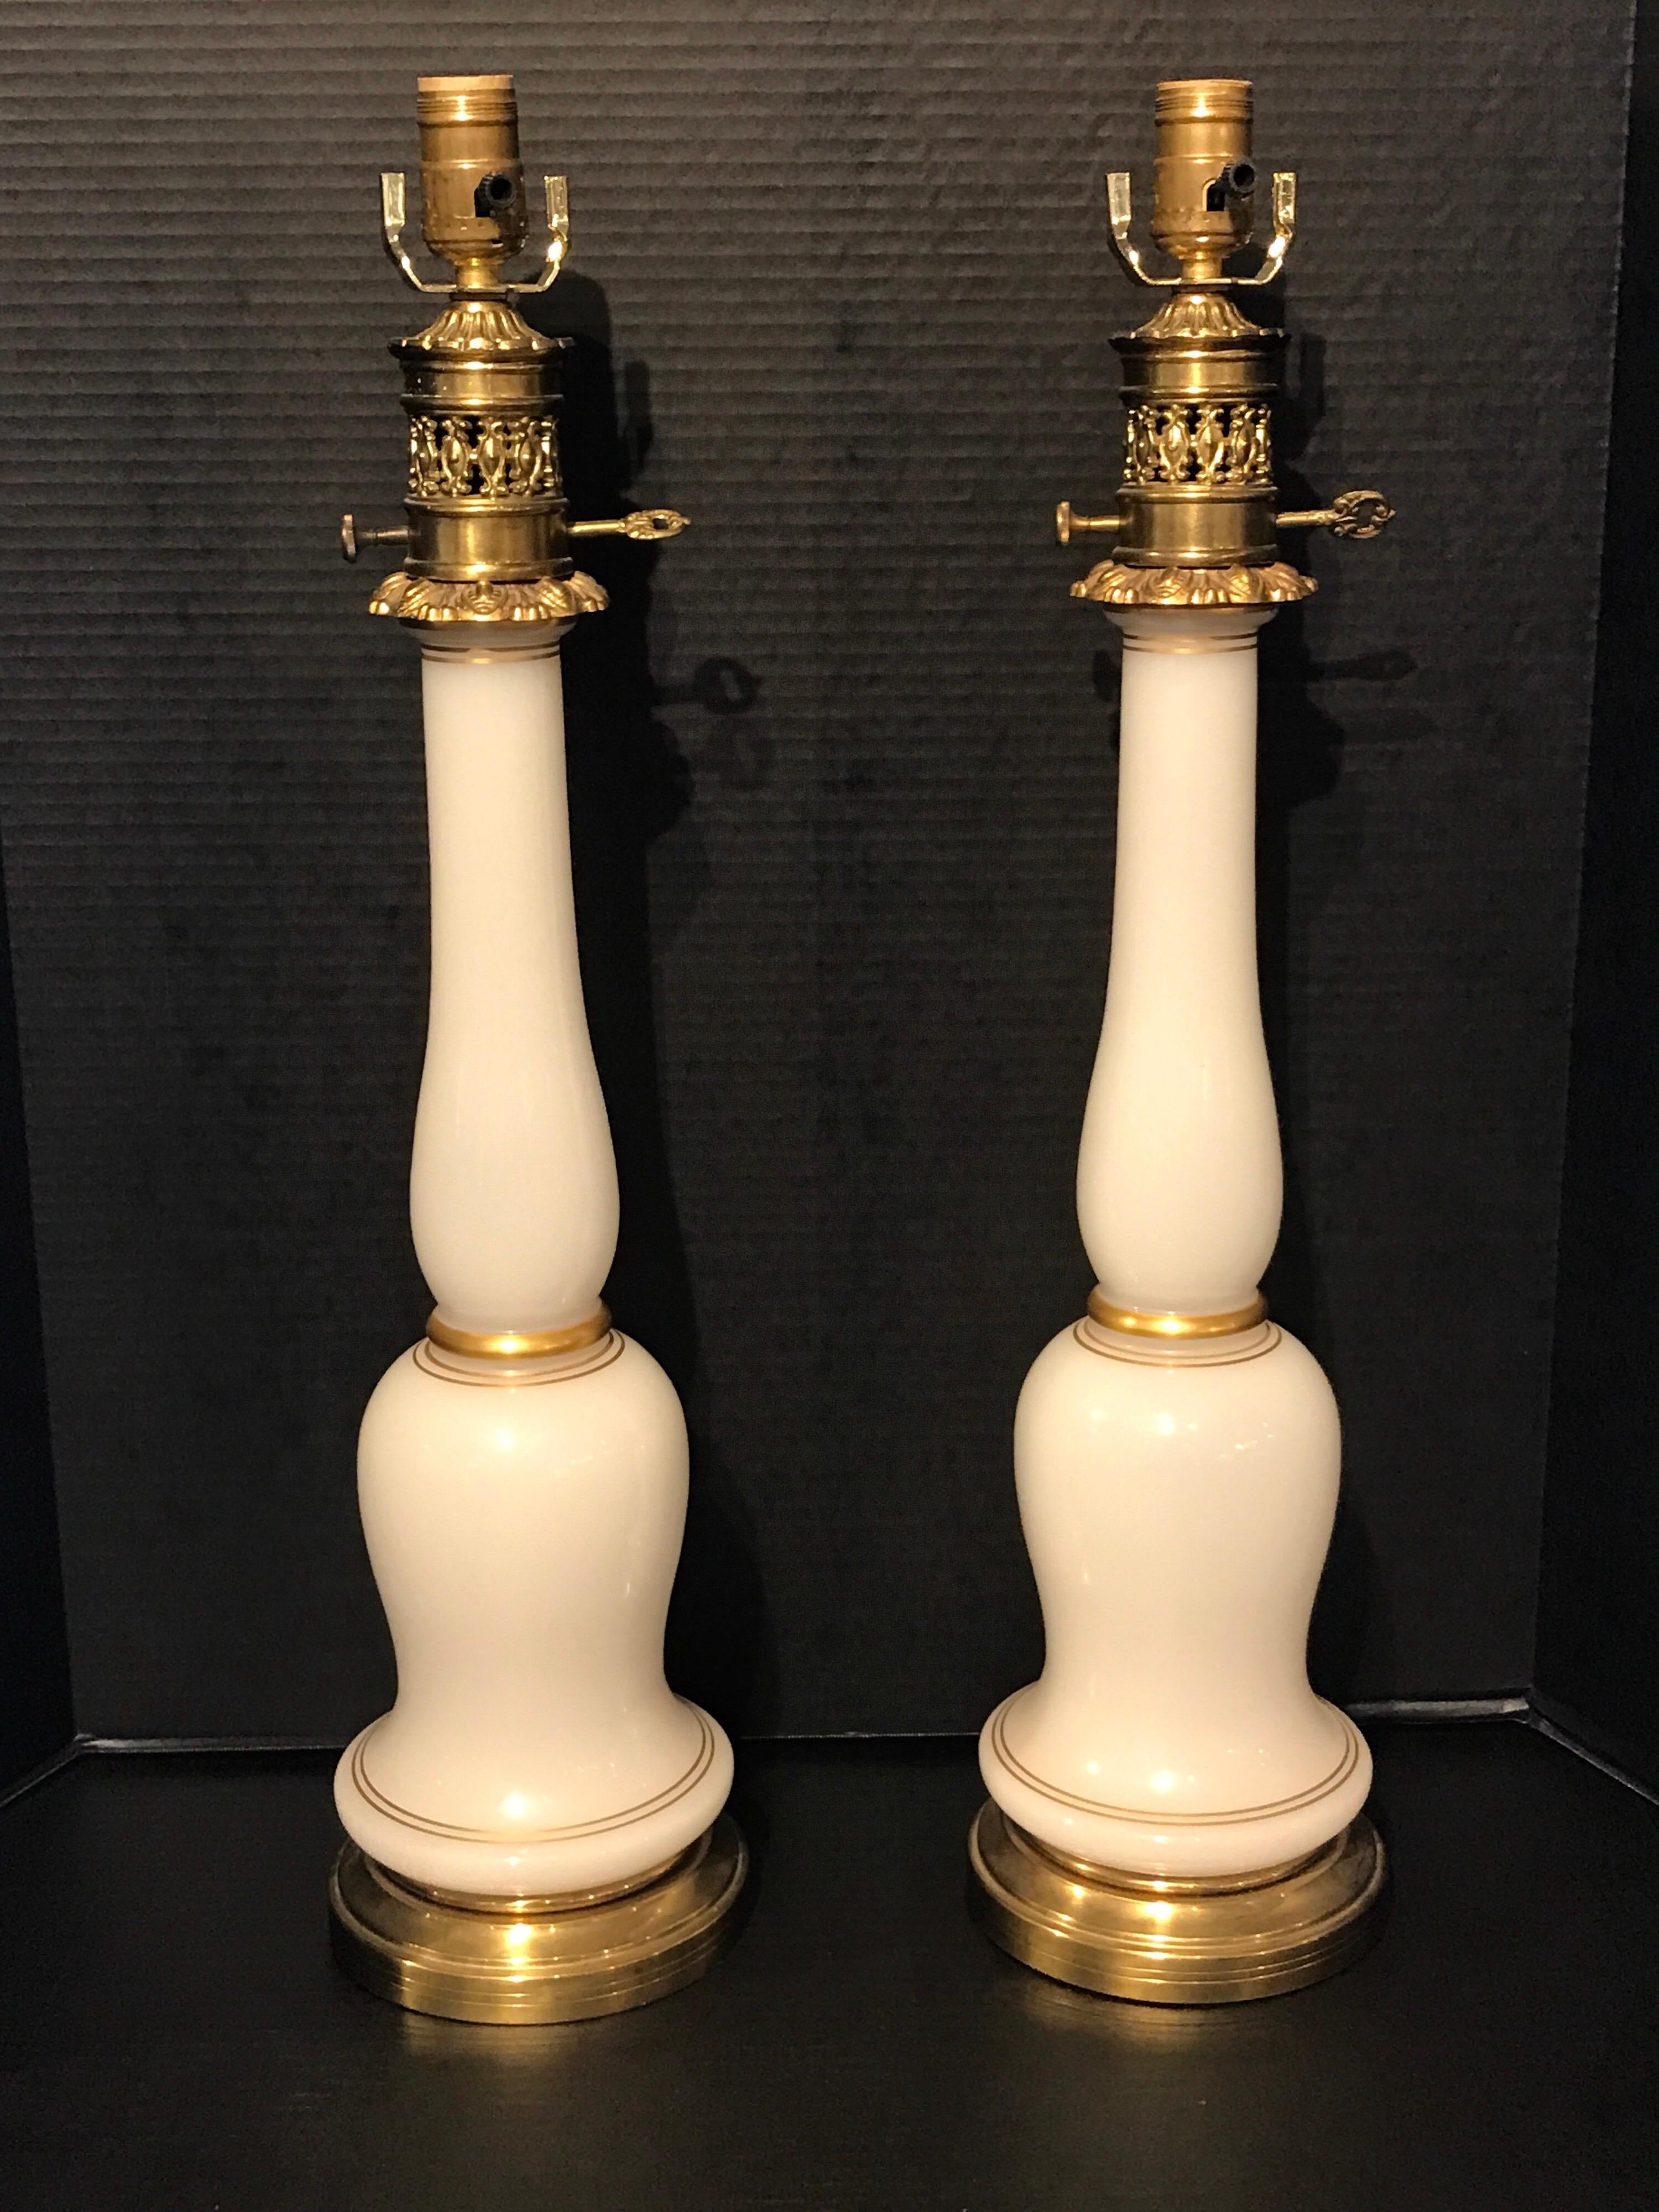 Pair of French opaline bronze column lamps, each one with bronze mounts with gilt highlights. Each lamp stands 26.5